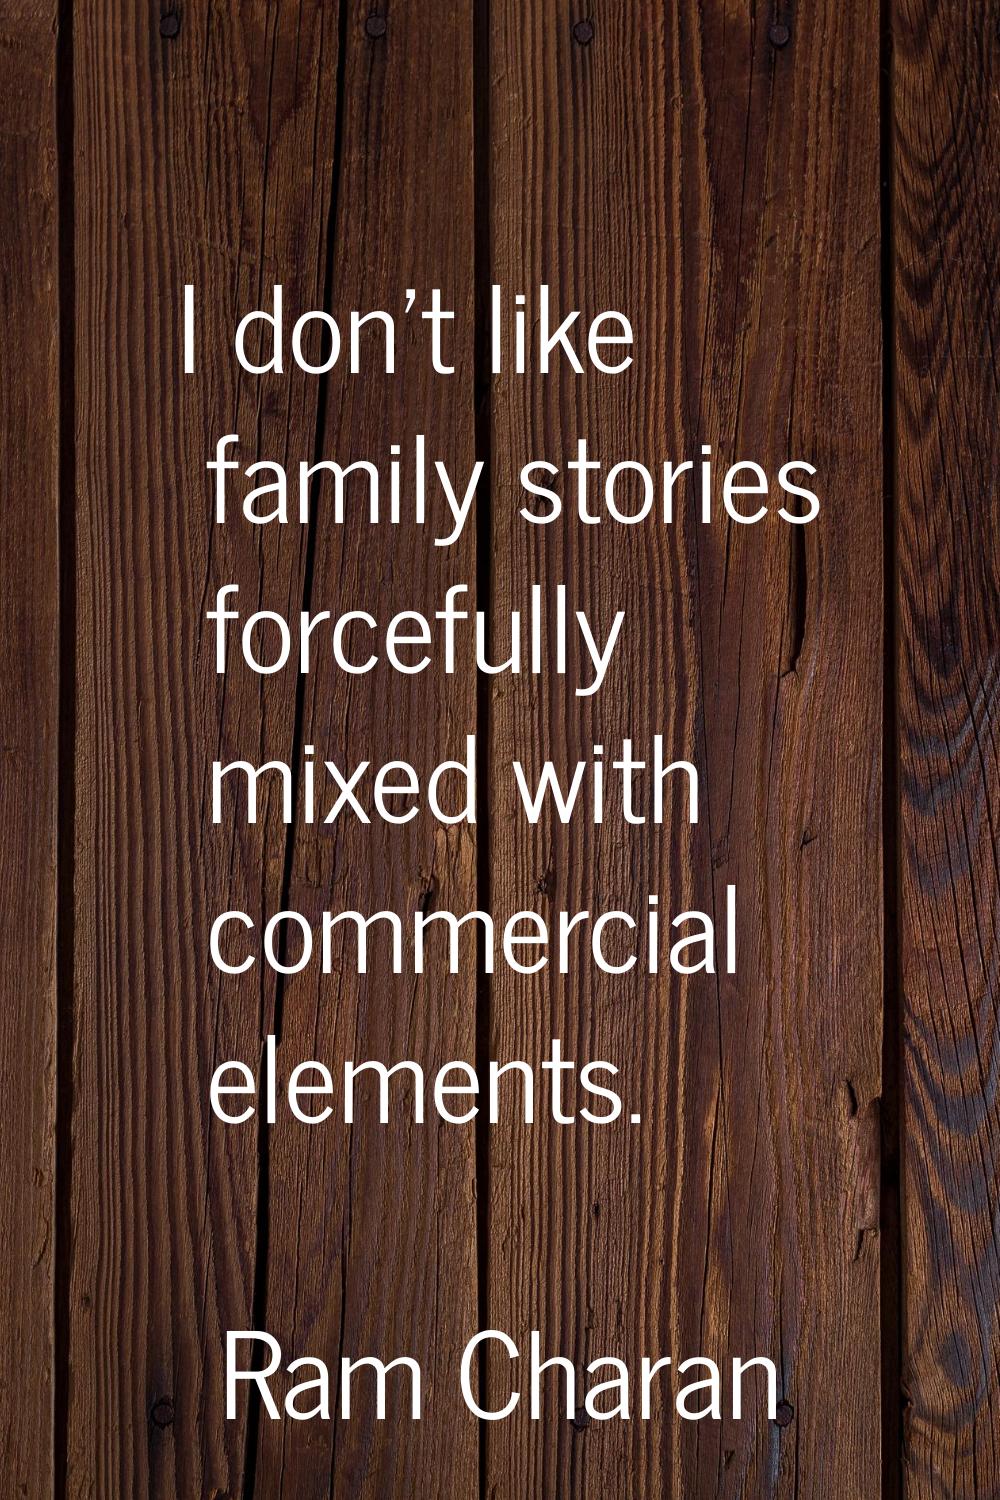 I don't like family stories forcefully mixed with commercial elements.